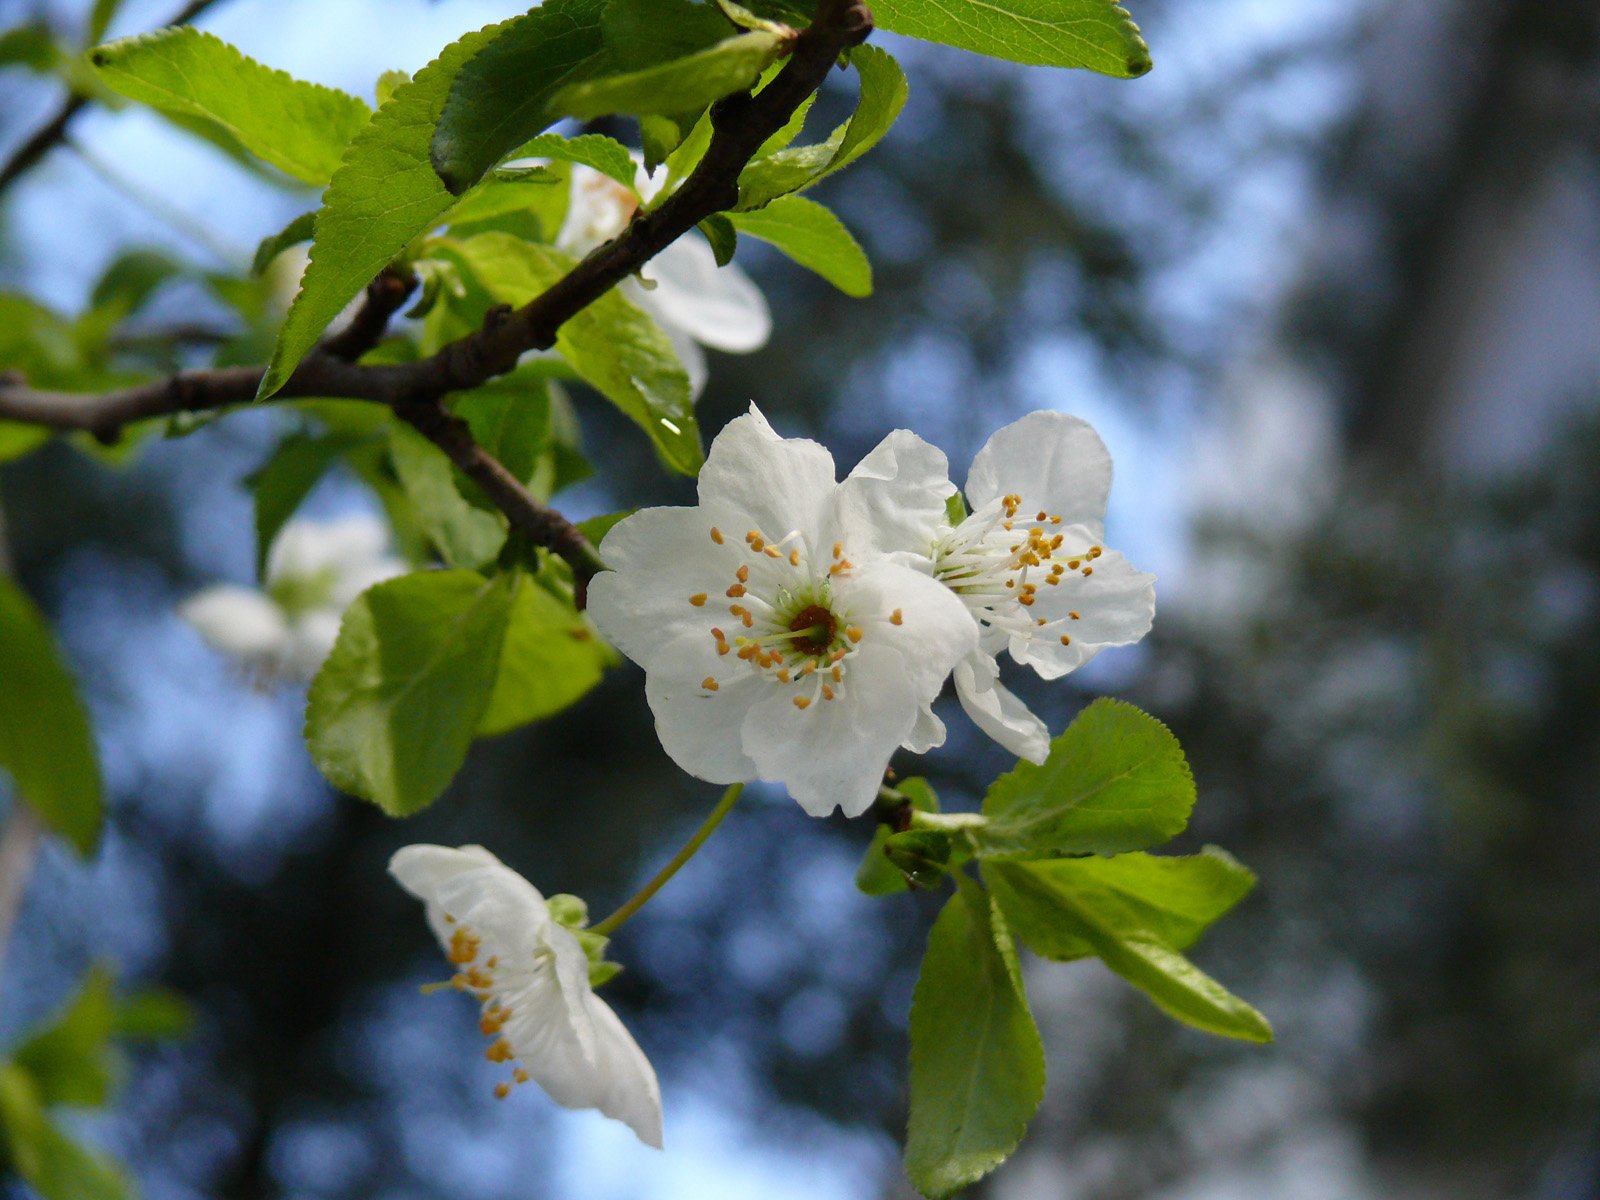 blossoming white flowers in a green leaf filled area